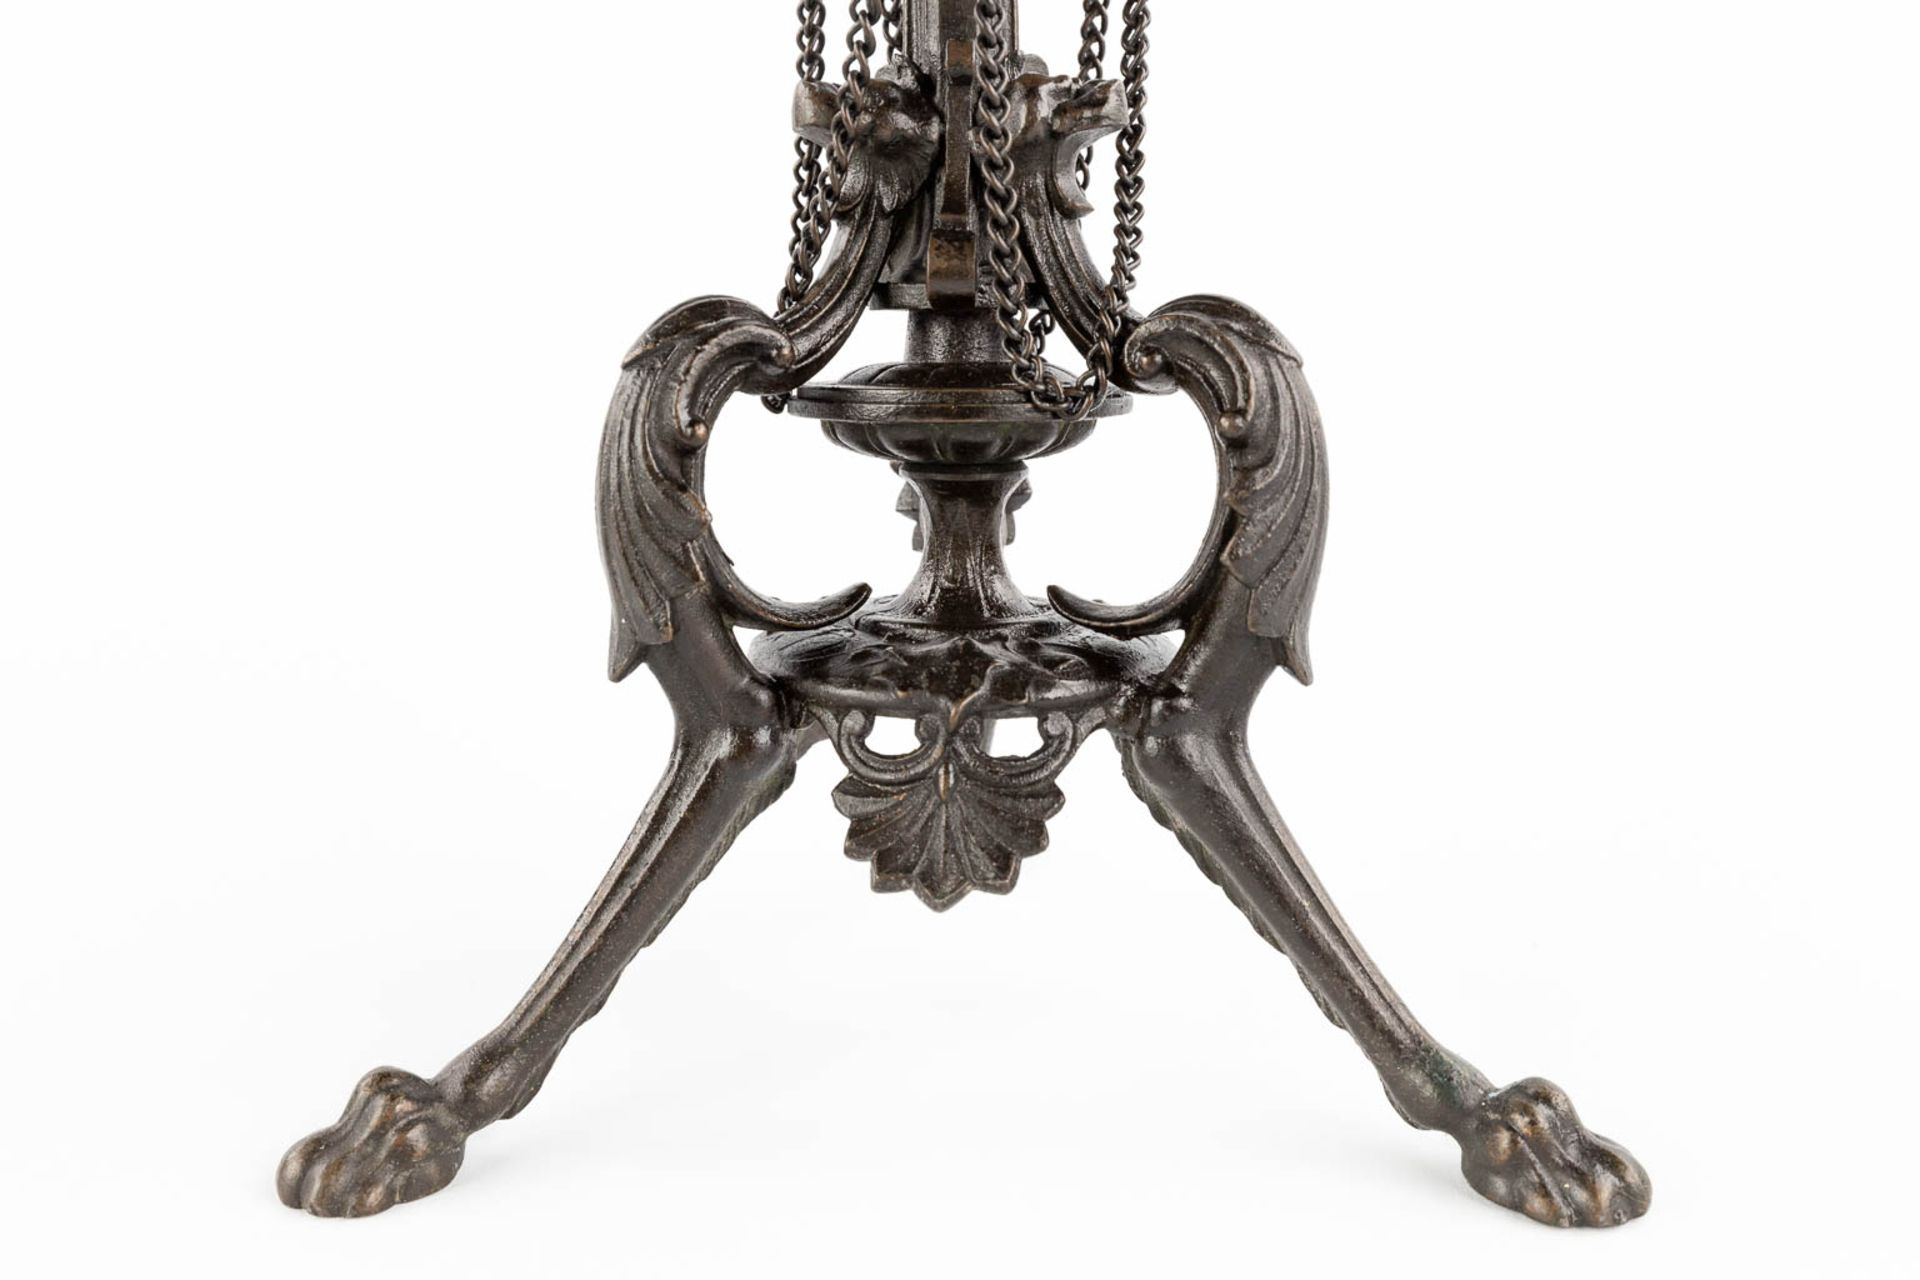 A pair of candelabra, bronze decorated with birds. 19th C. (H:56 x D:26 cm) - Image 9 of 12